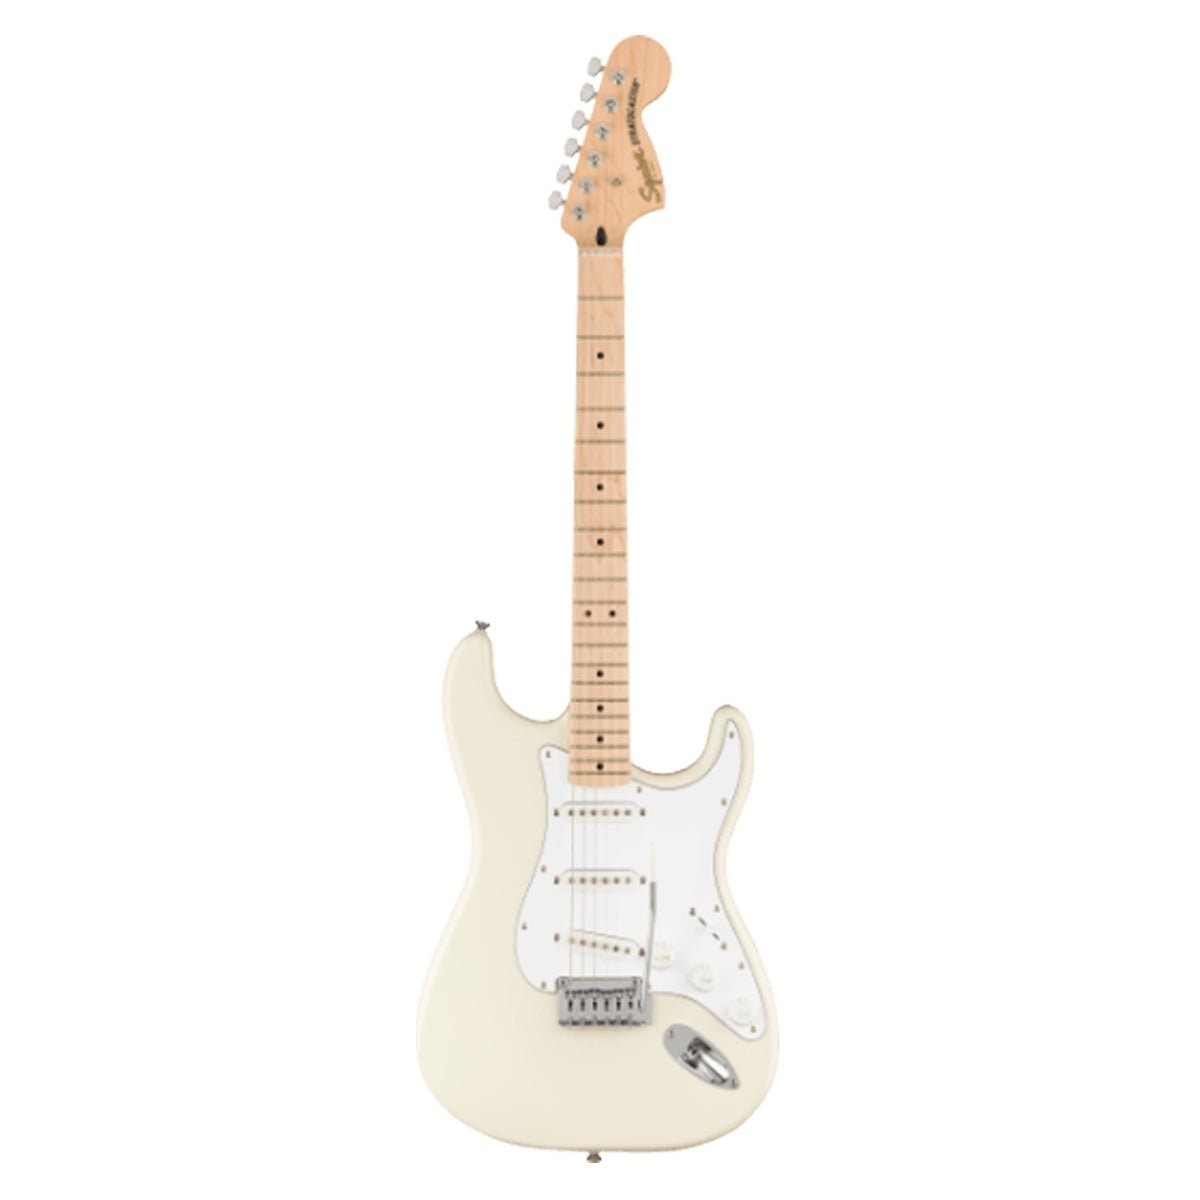 Squier Affinity Series Stratocaster, Maple Fingerboard, White